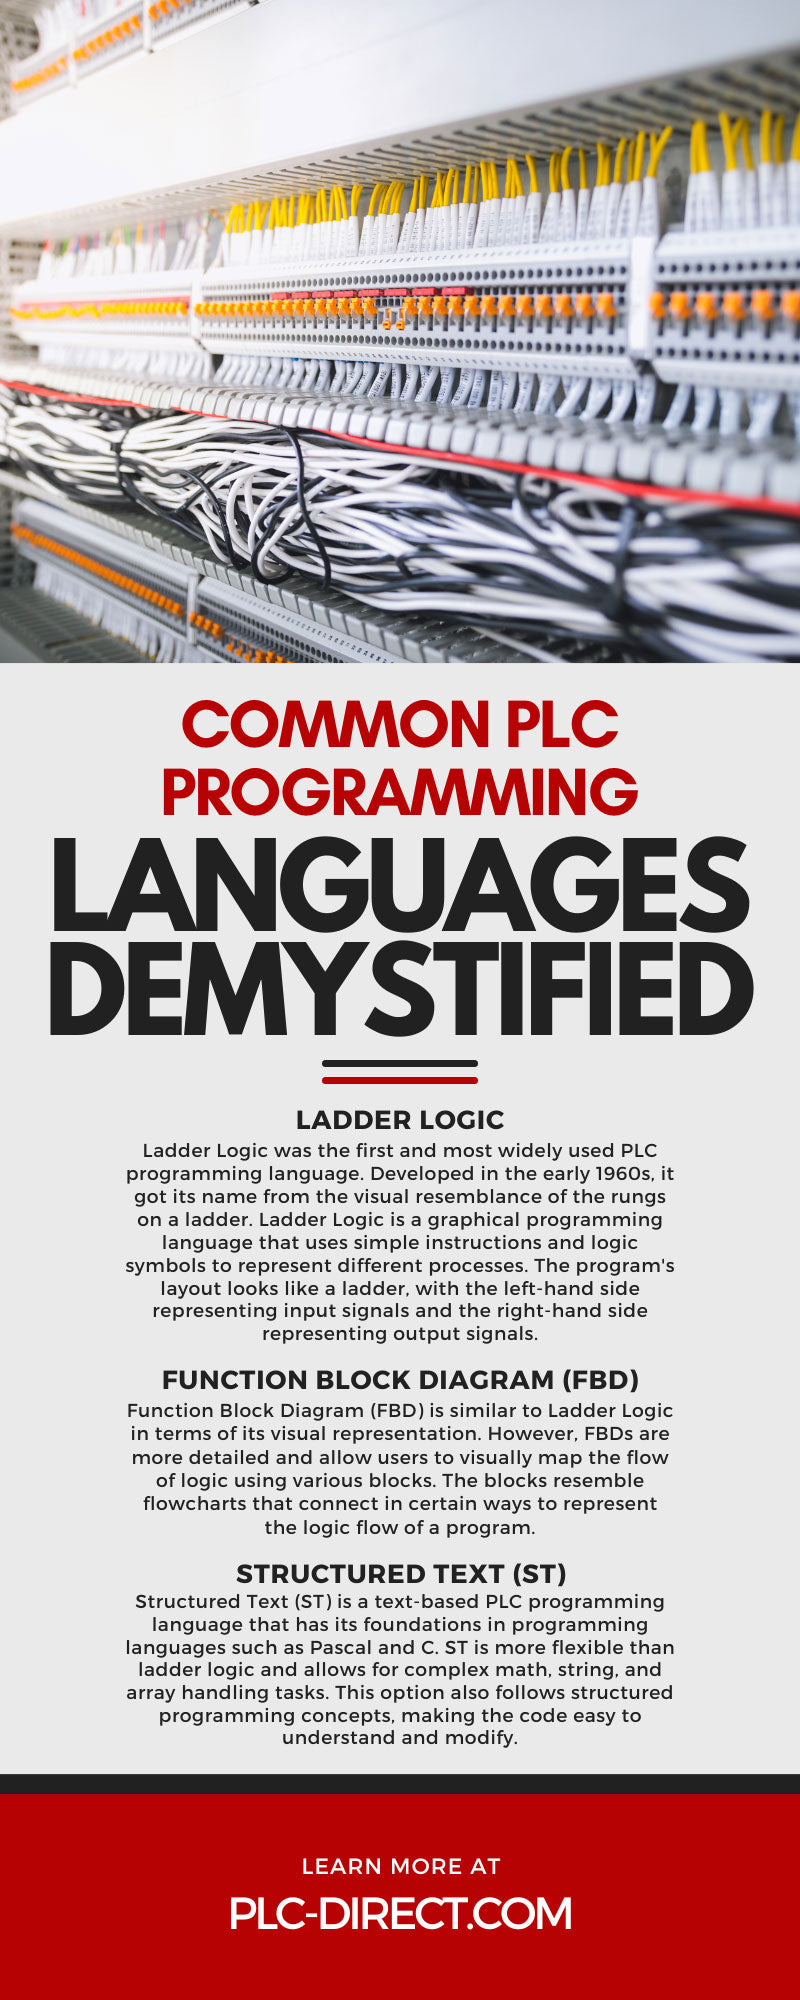 5 Common PLC Programming Languages Demystified